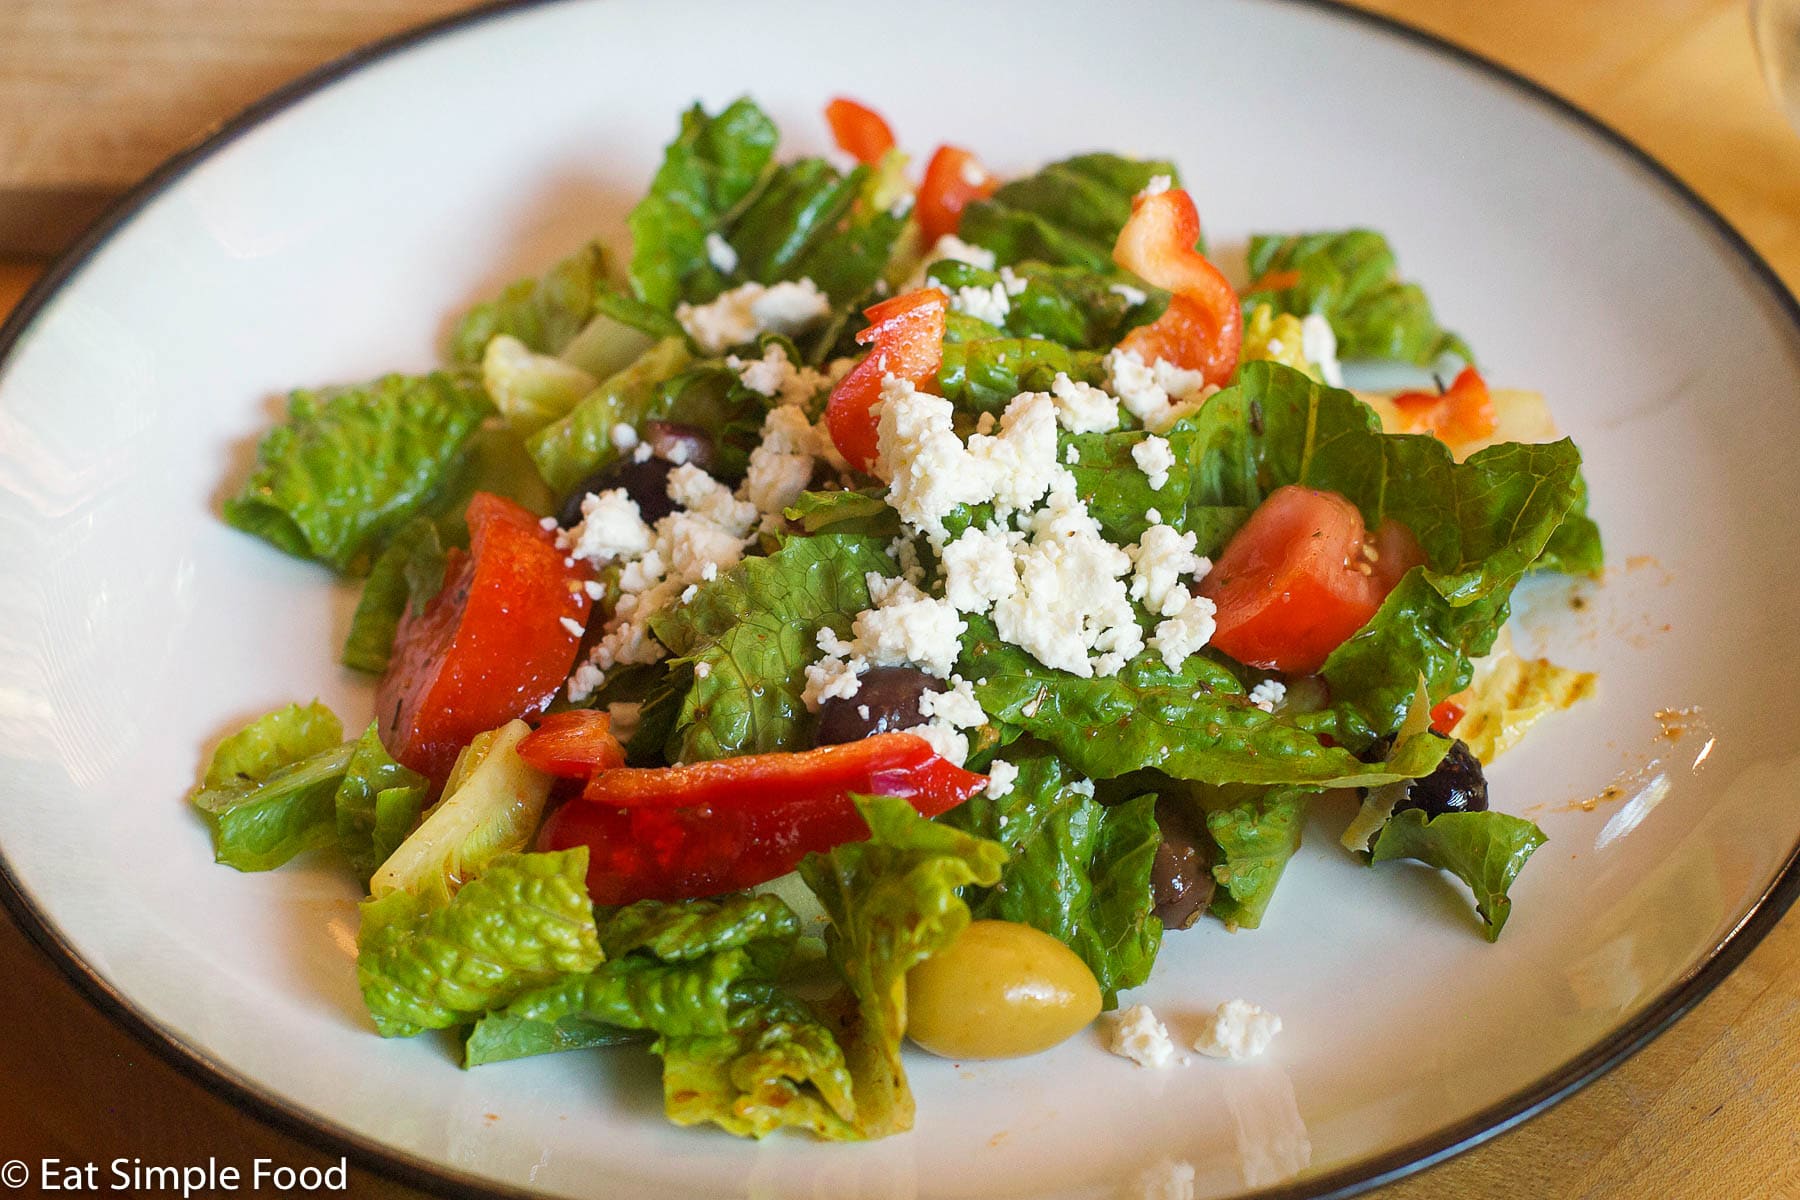 Romaine lettuce chunked, chunks of tomatoes, red peppers, whole olives and crumbled feta cheese. On a white plate.